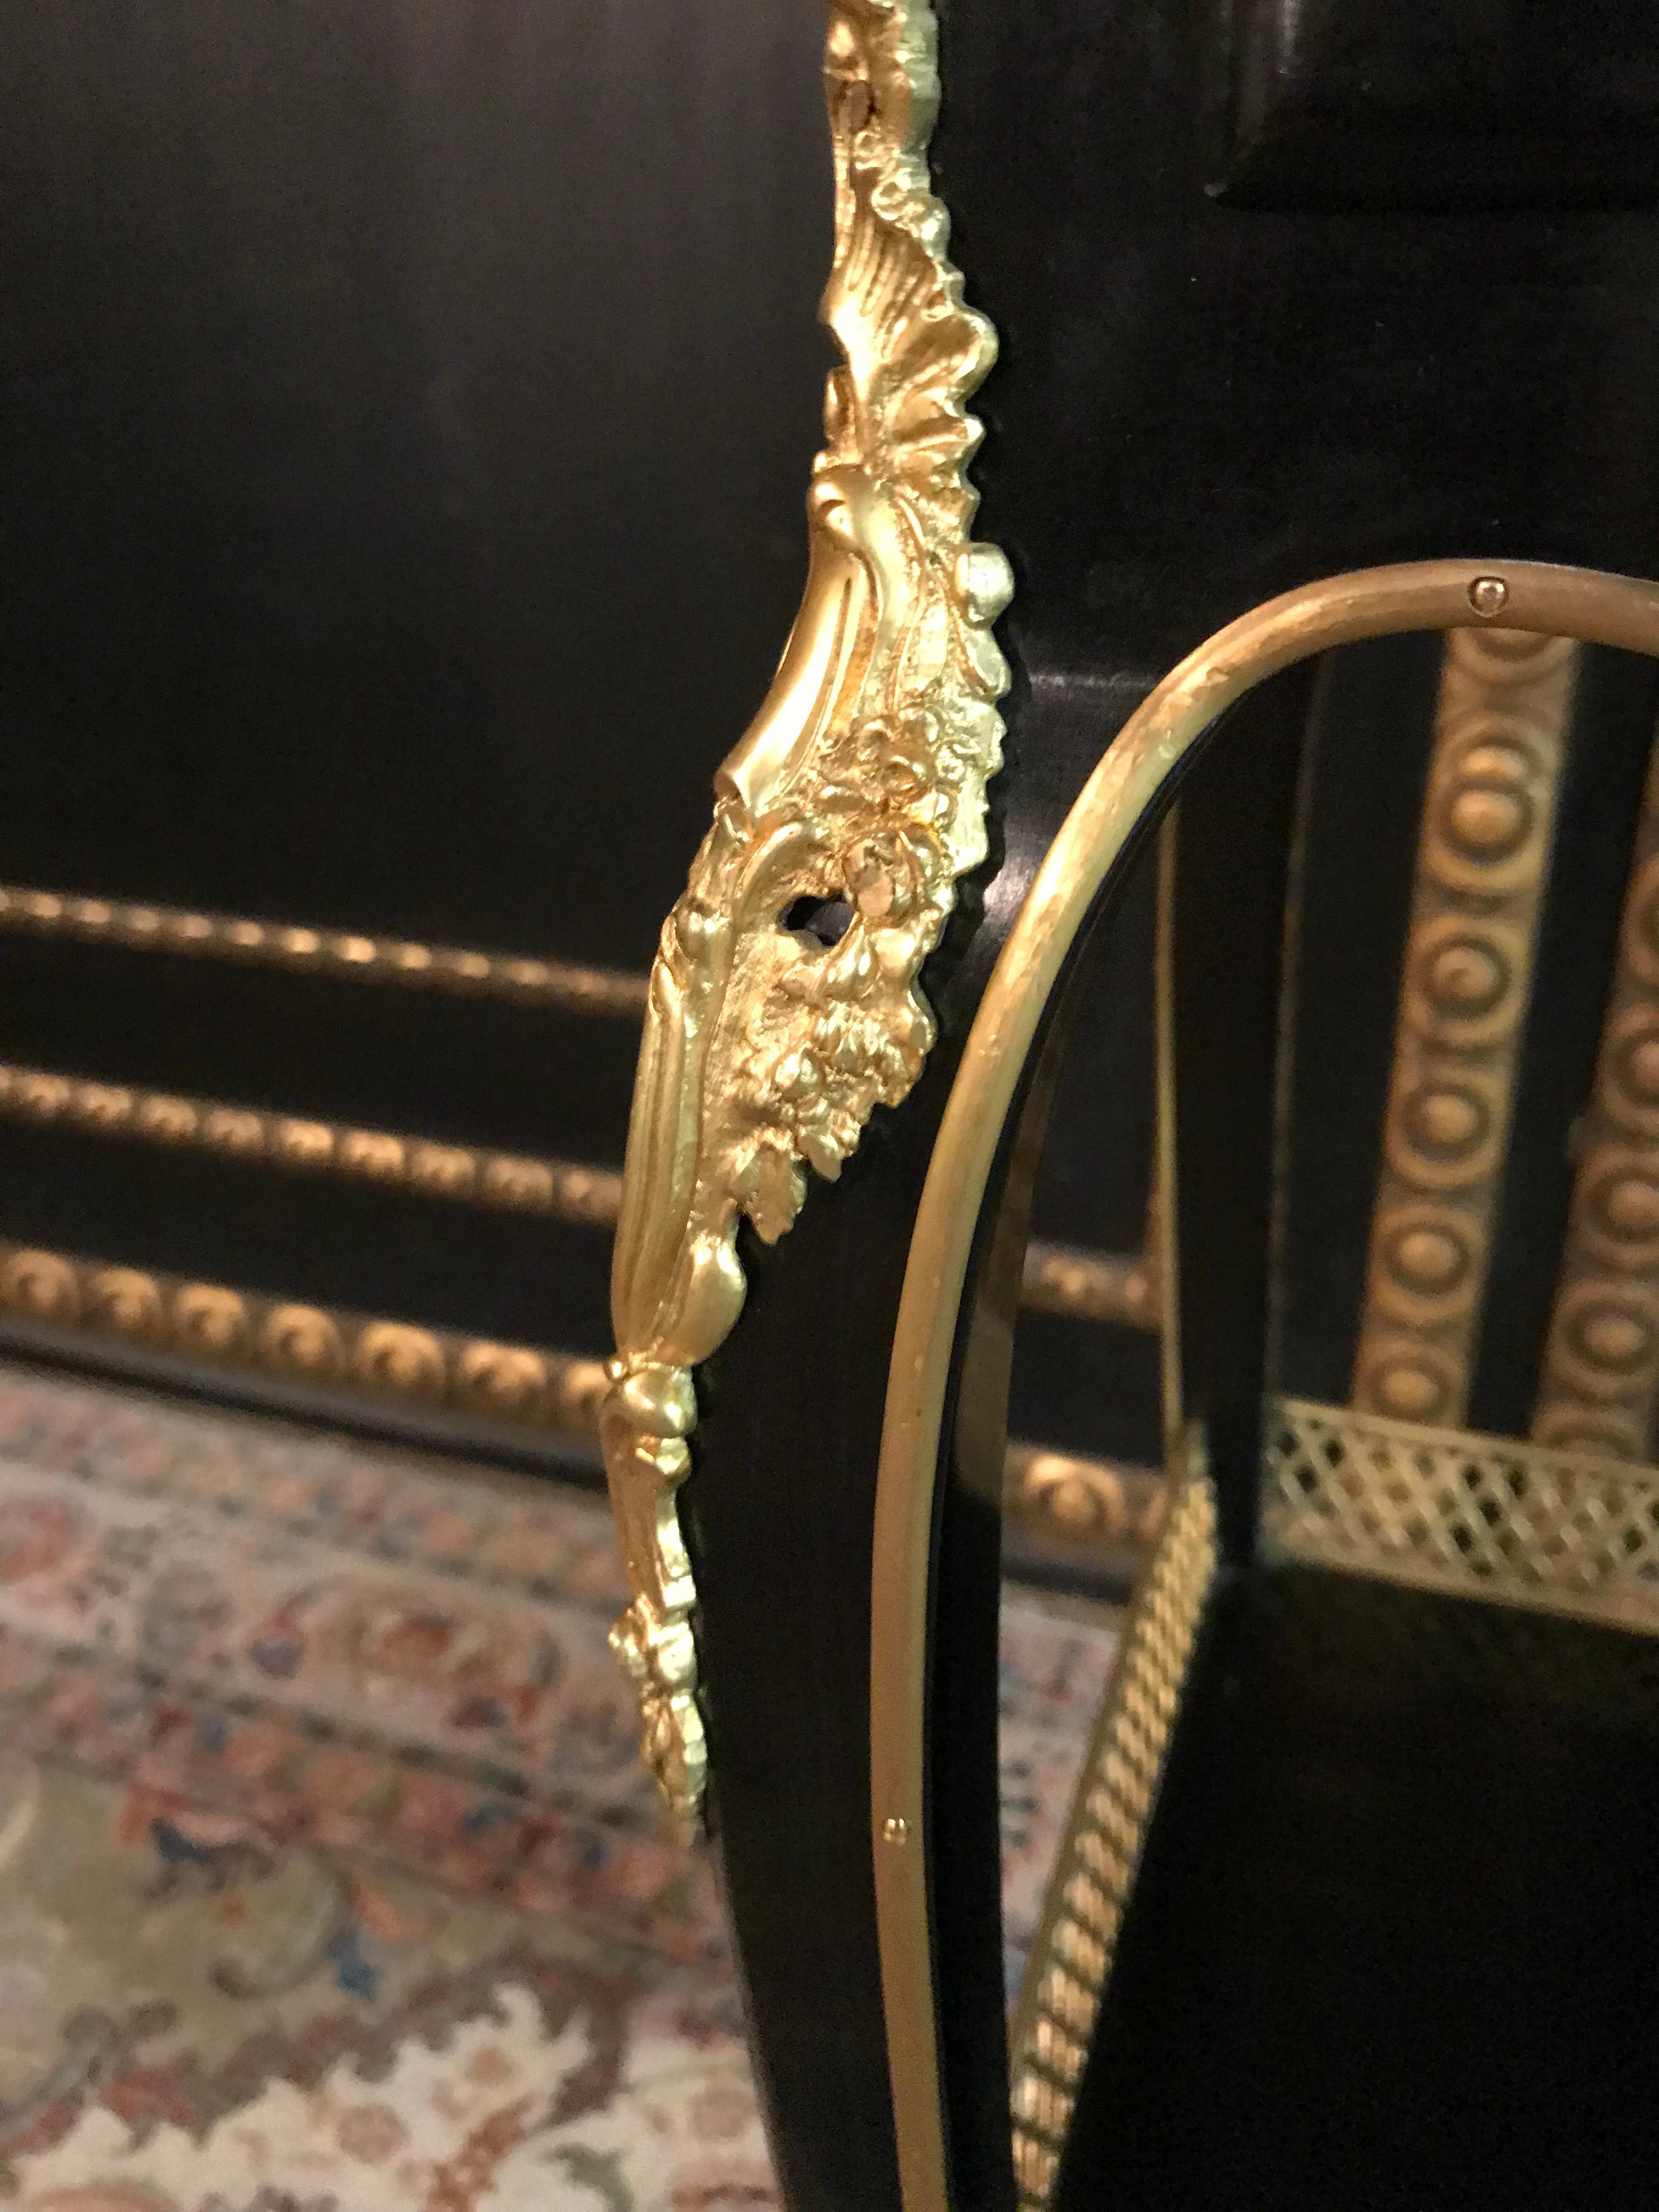 Filigree Side Table in Louis Seize Style after Henry Dasson, Paris 1